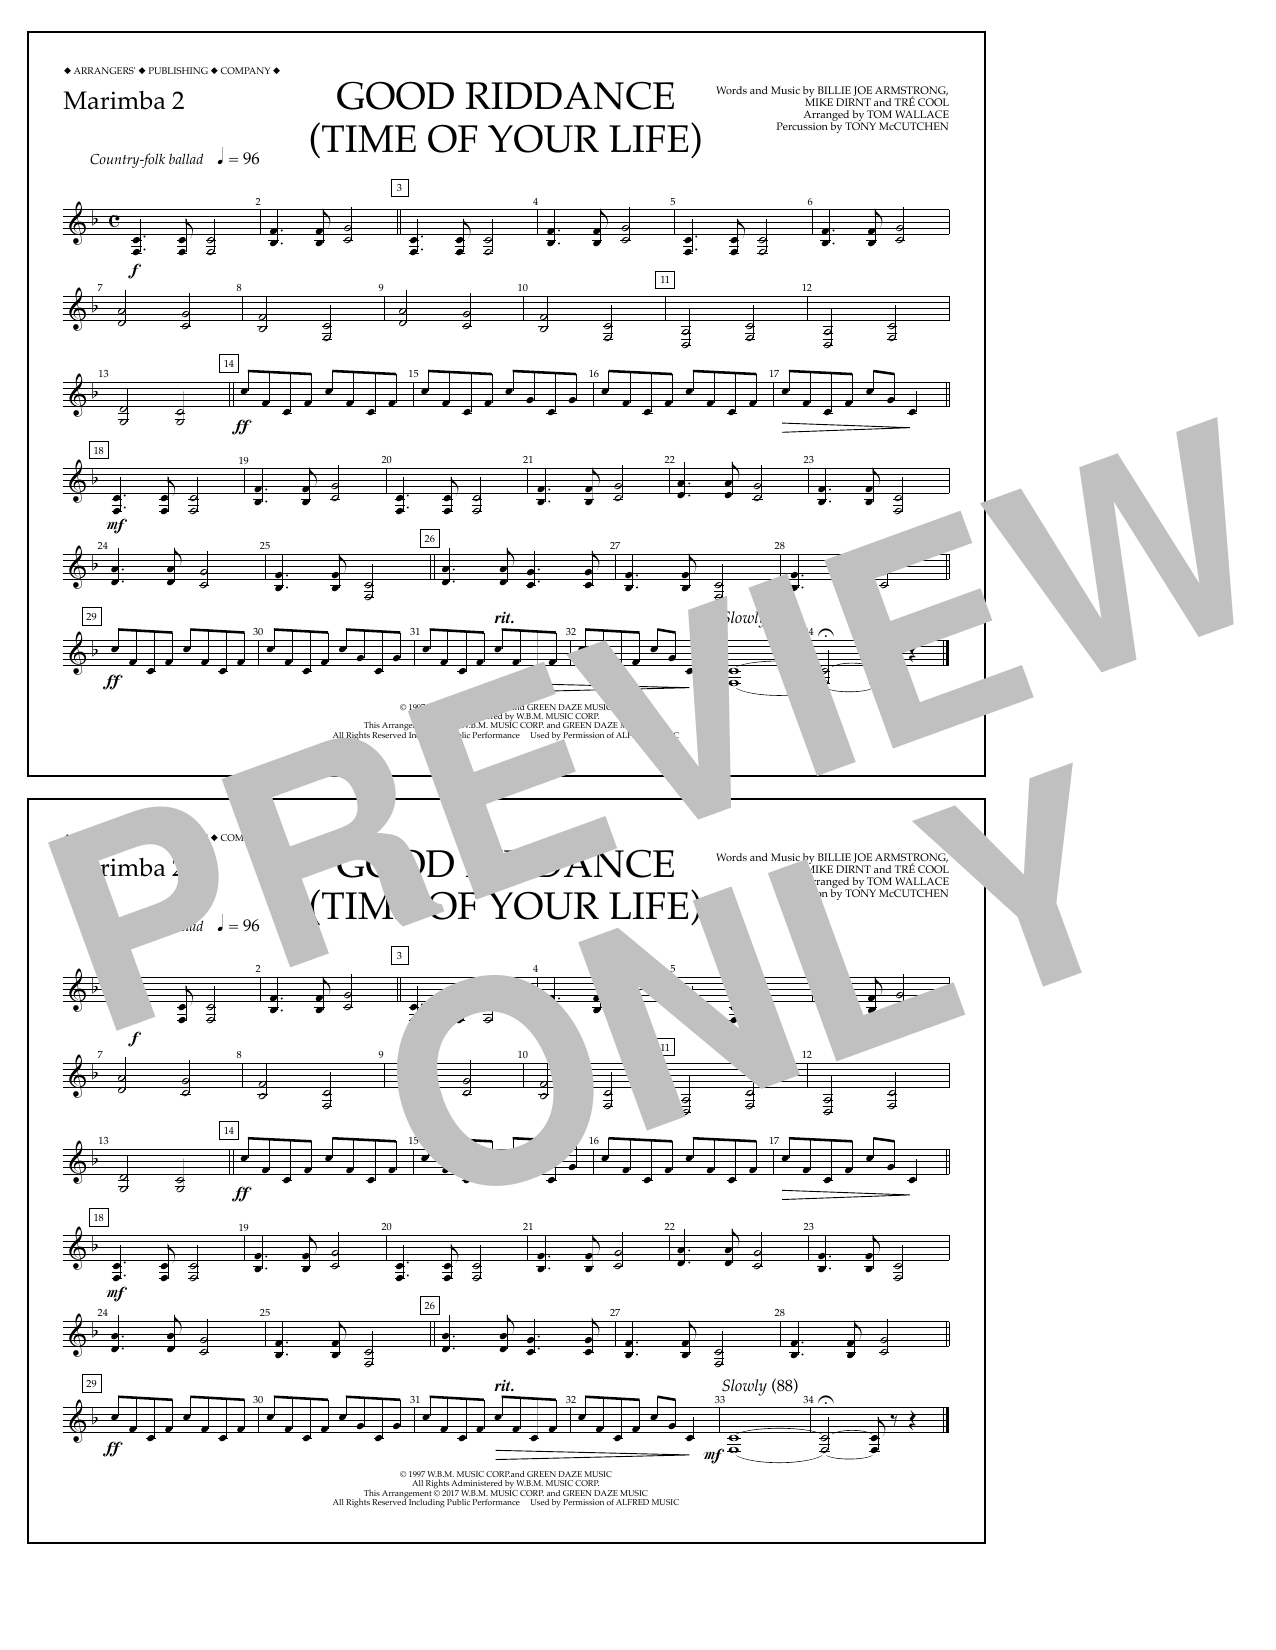 Download Tom Wallace Good Riddance (Time of Your Life) - Mar Sheet Music